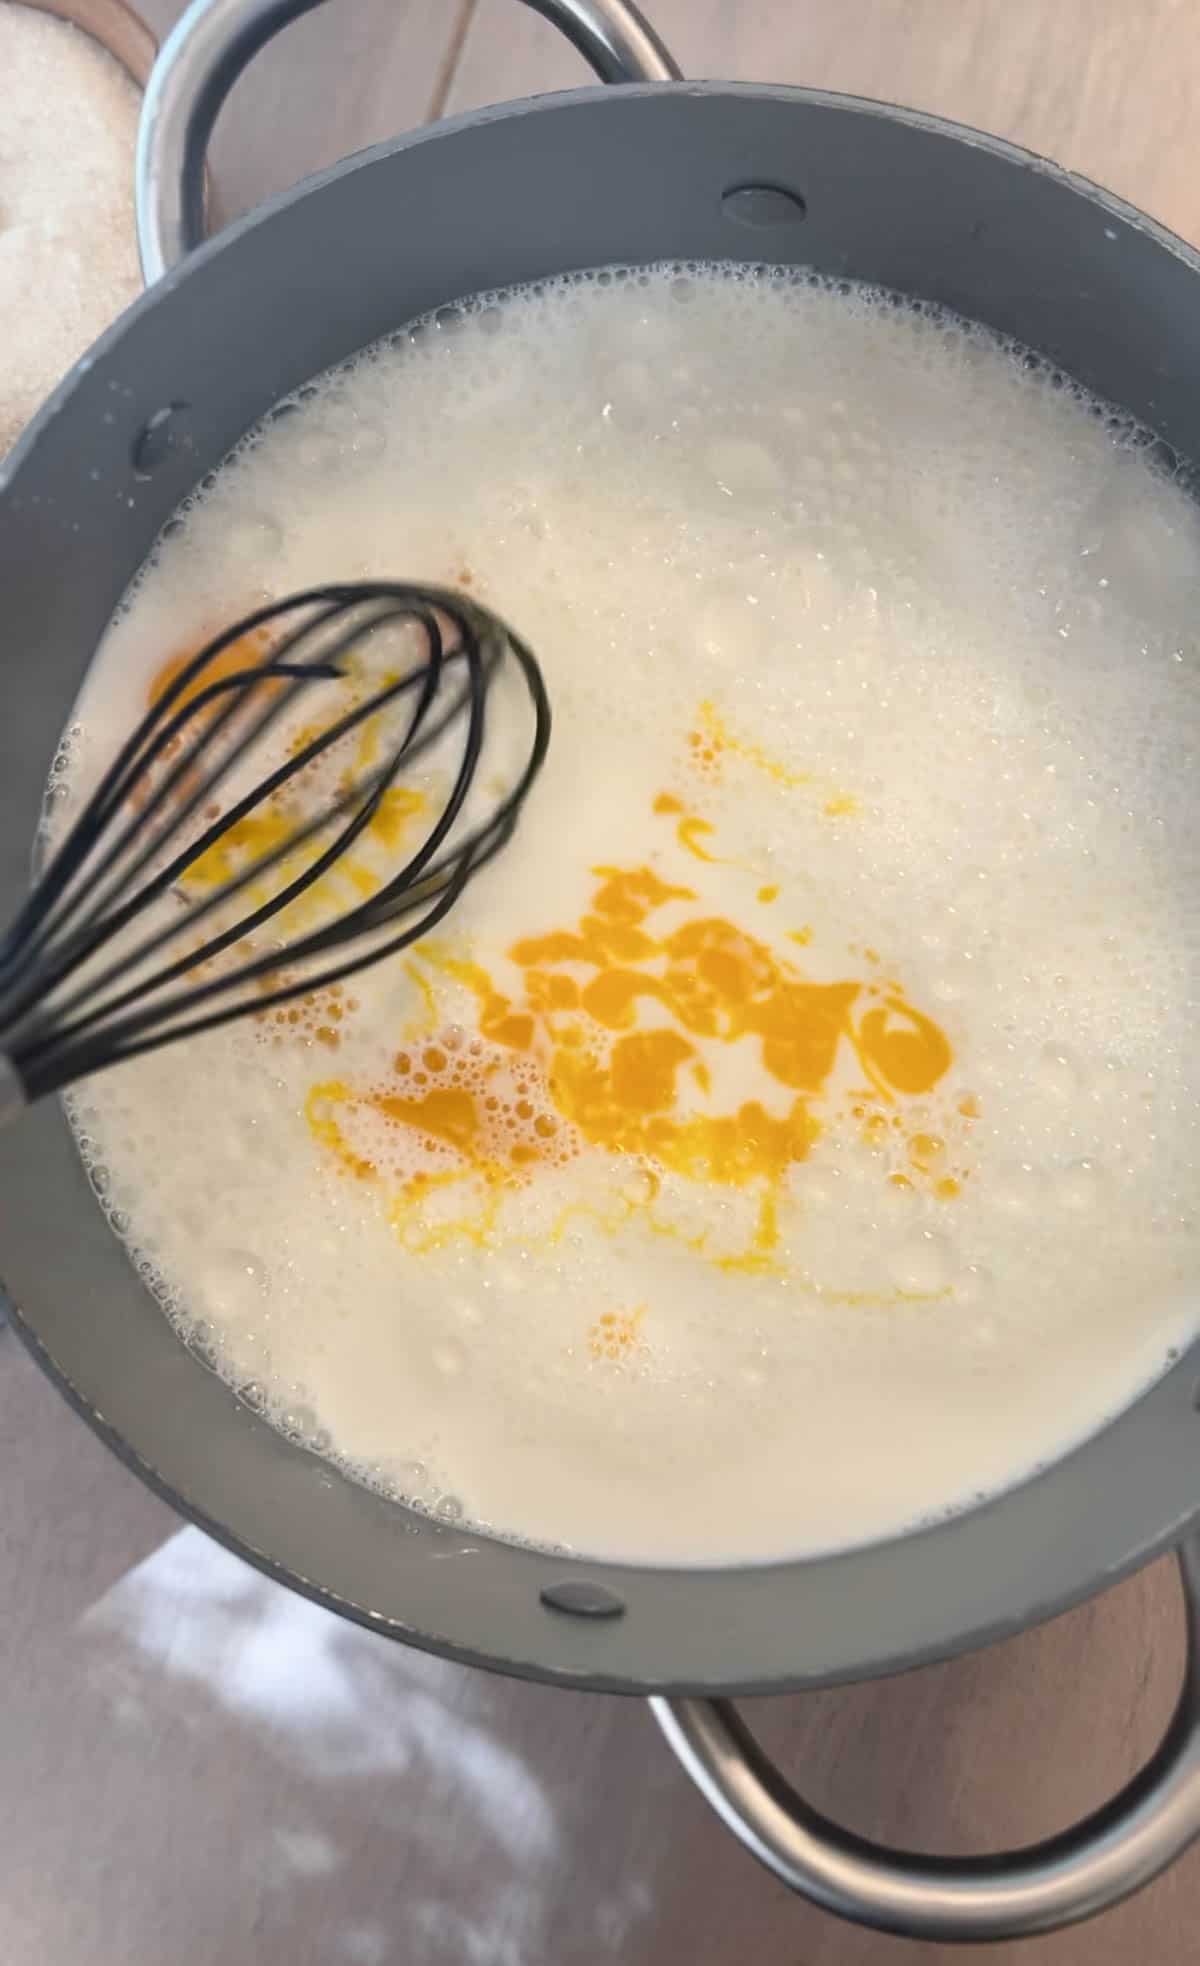 Non Alcoholic Eggnog Recipe being made with milk and eggs being stirred